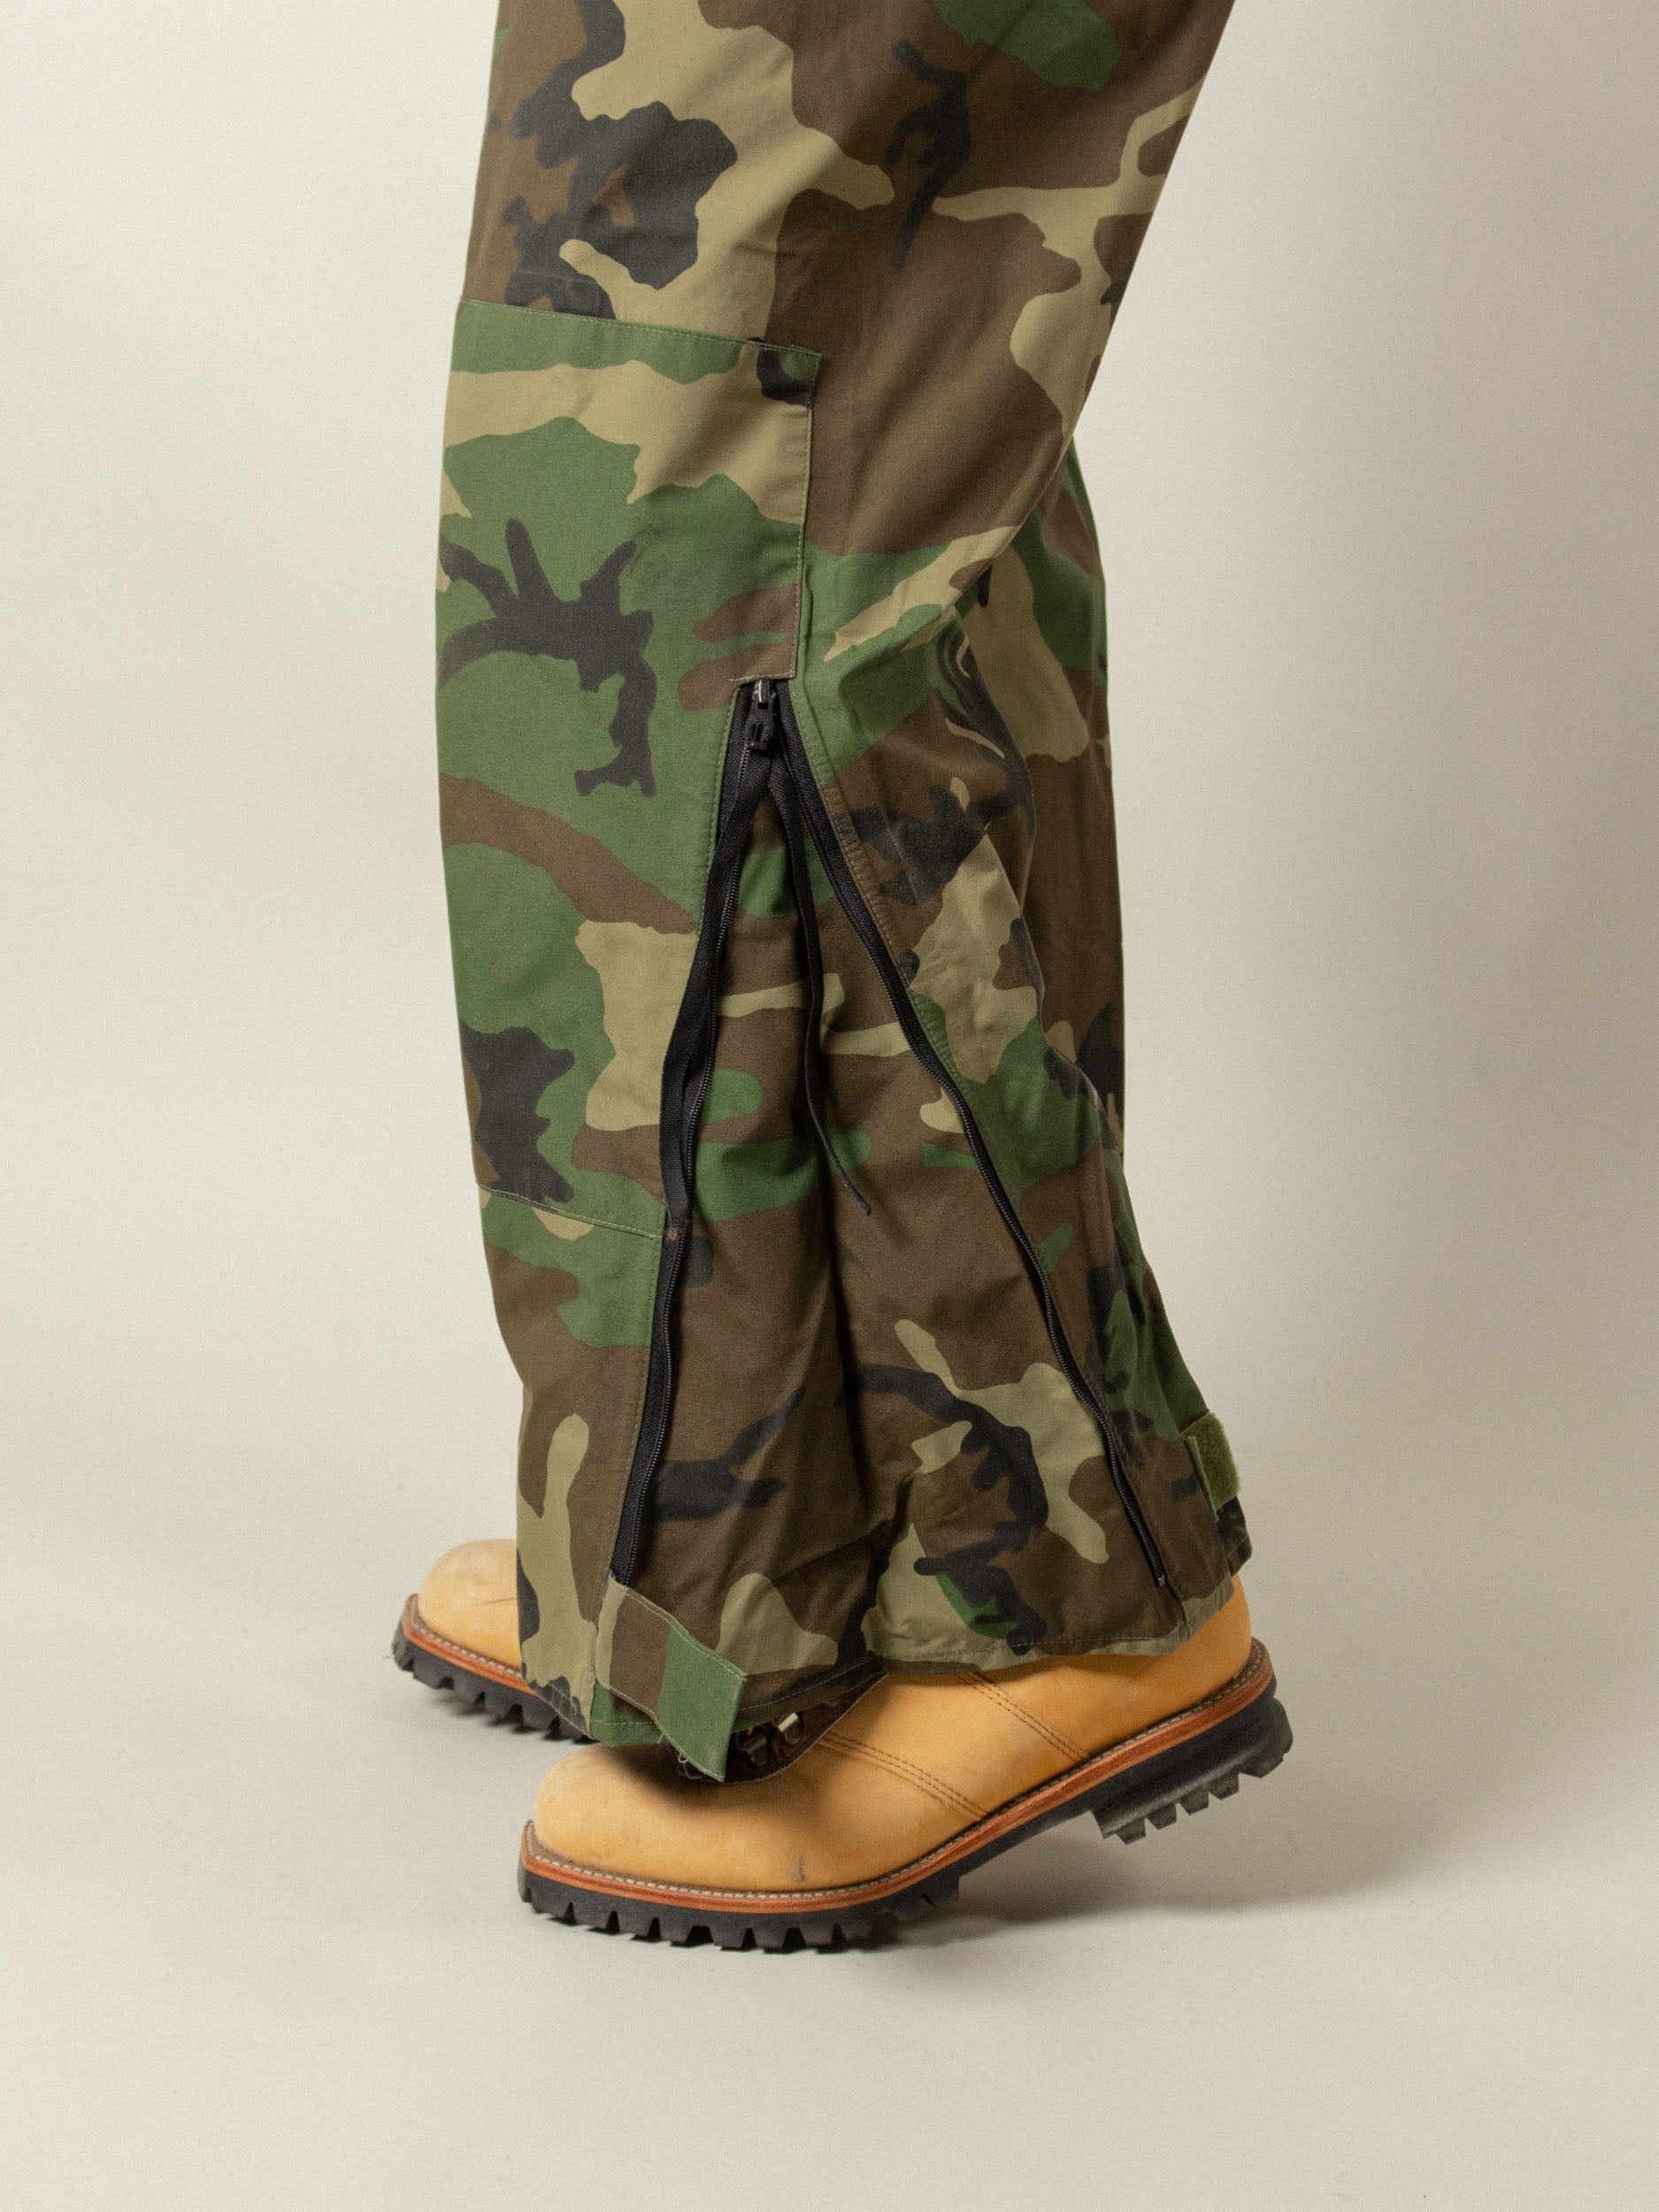 The Vintage Camo Pant in Army 